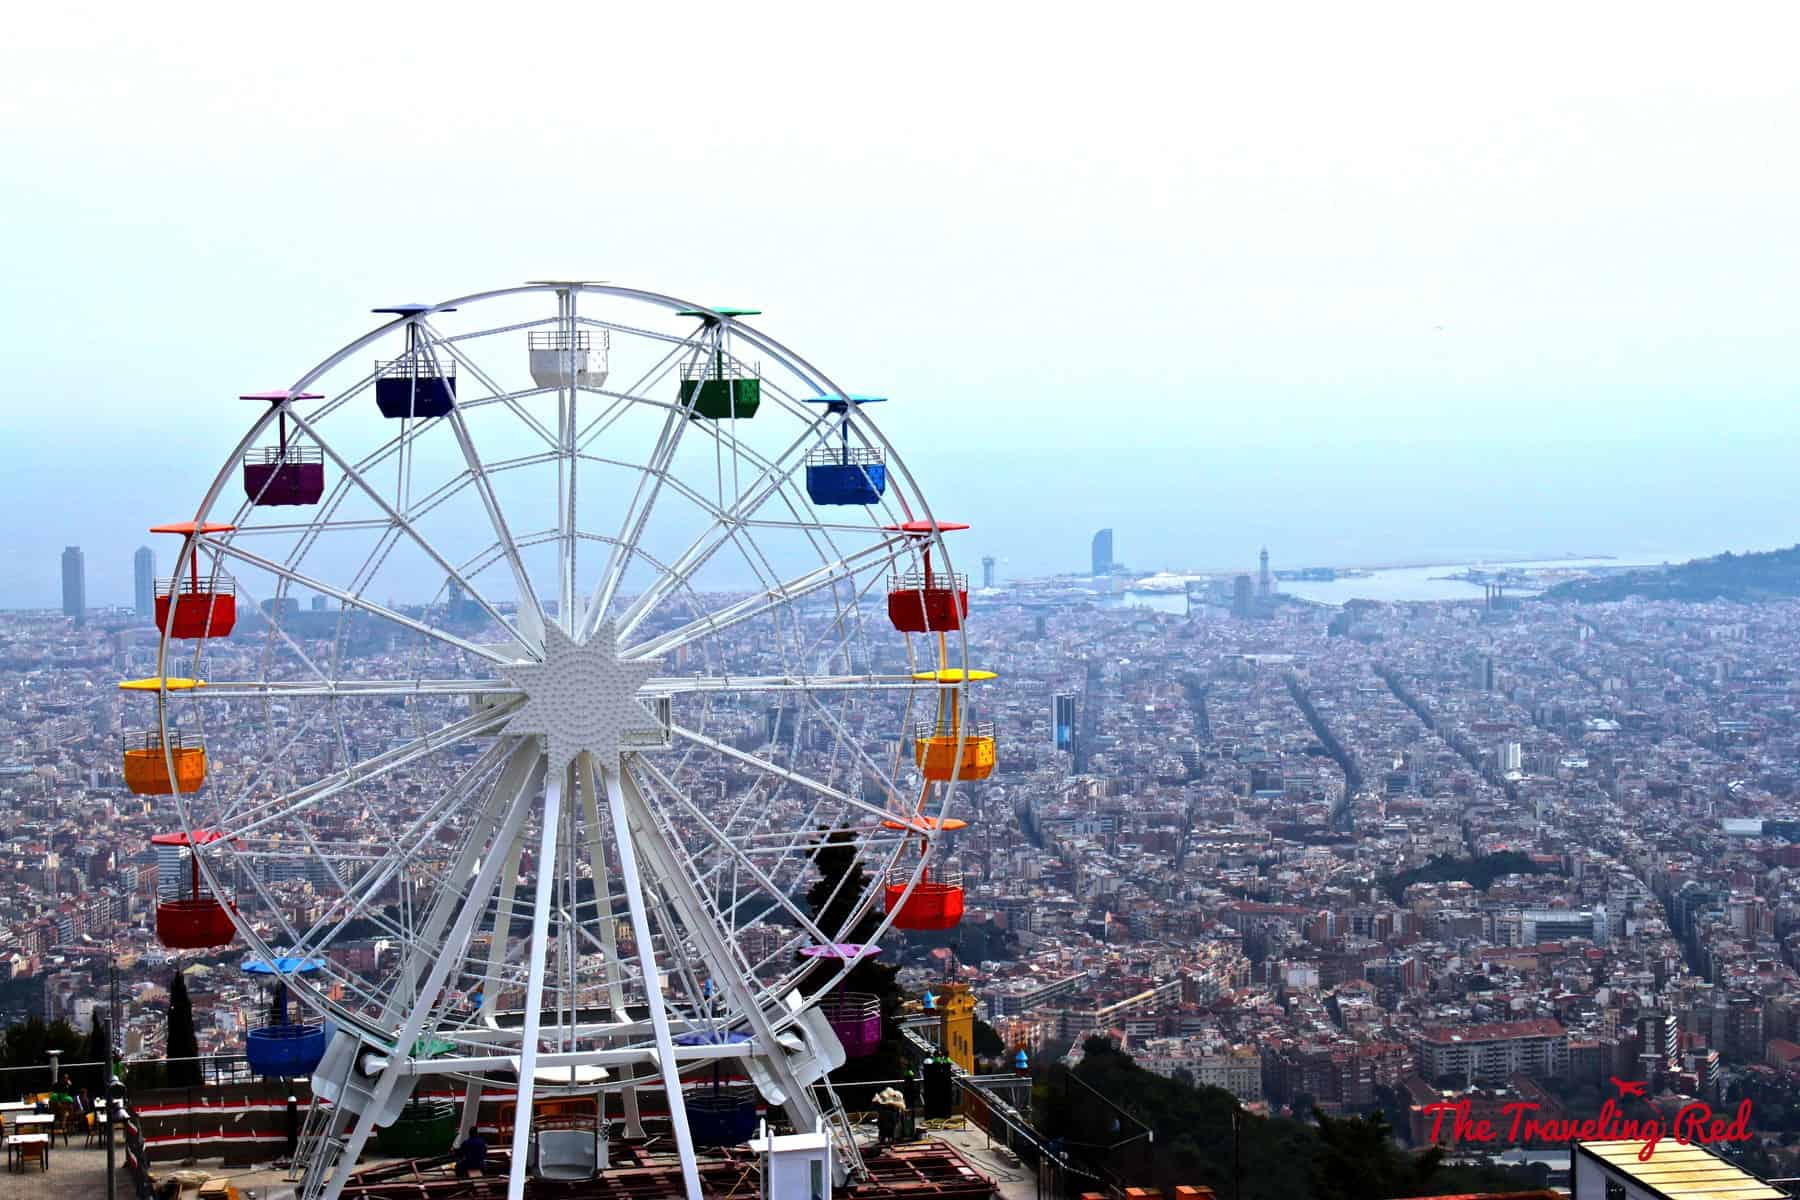 The amusement park overlooking Barcelona, Spain in Tibidabo. Tibidabo is a mountain with an amusement park and church on the summit. It is the highest point in the city with incredible sweeping views of the city.